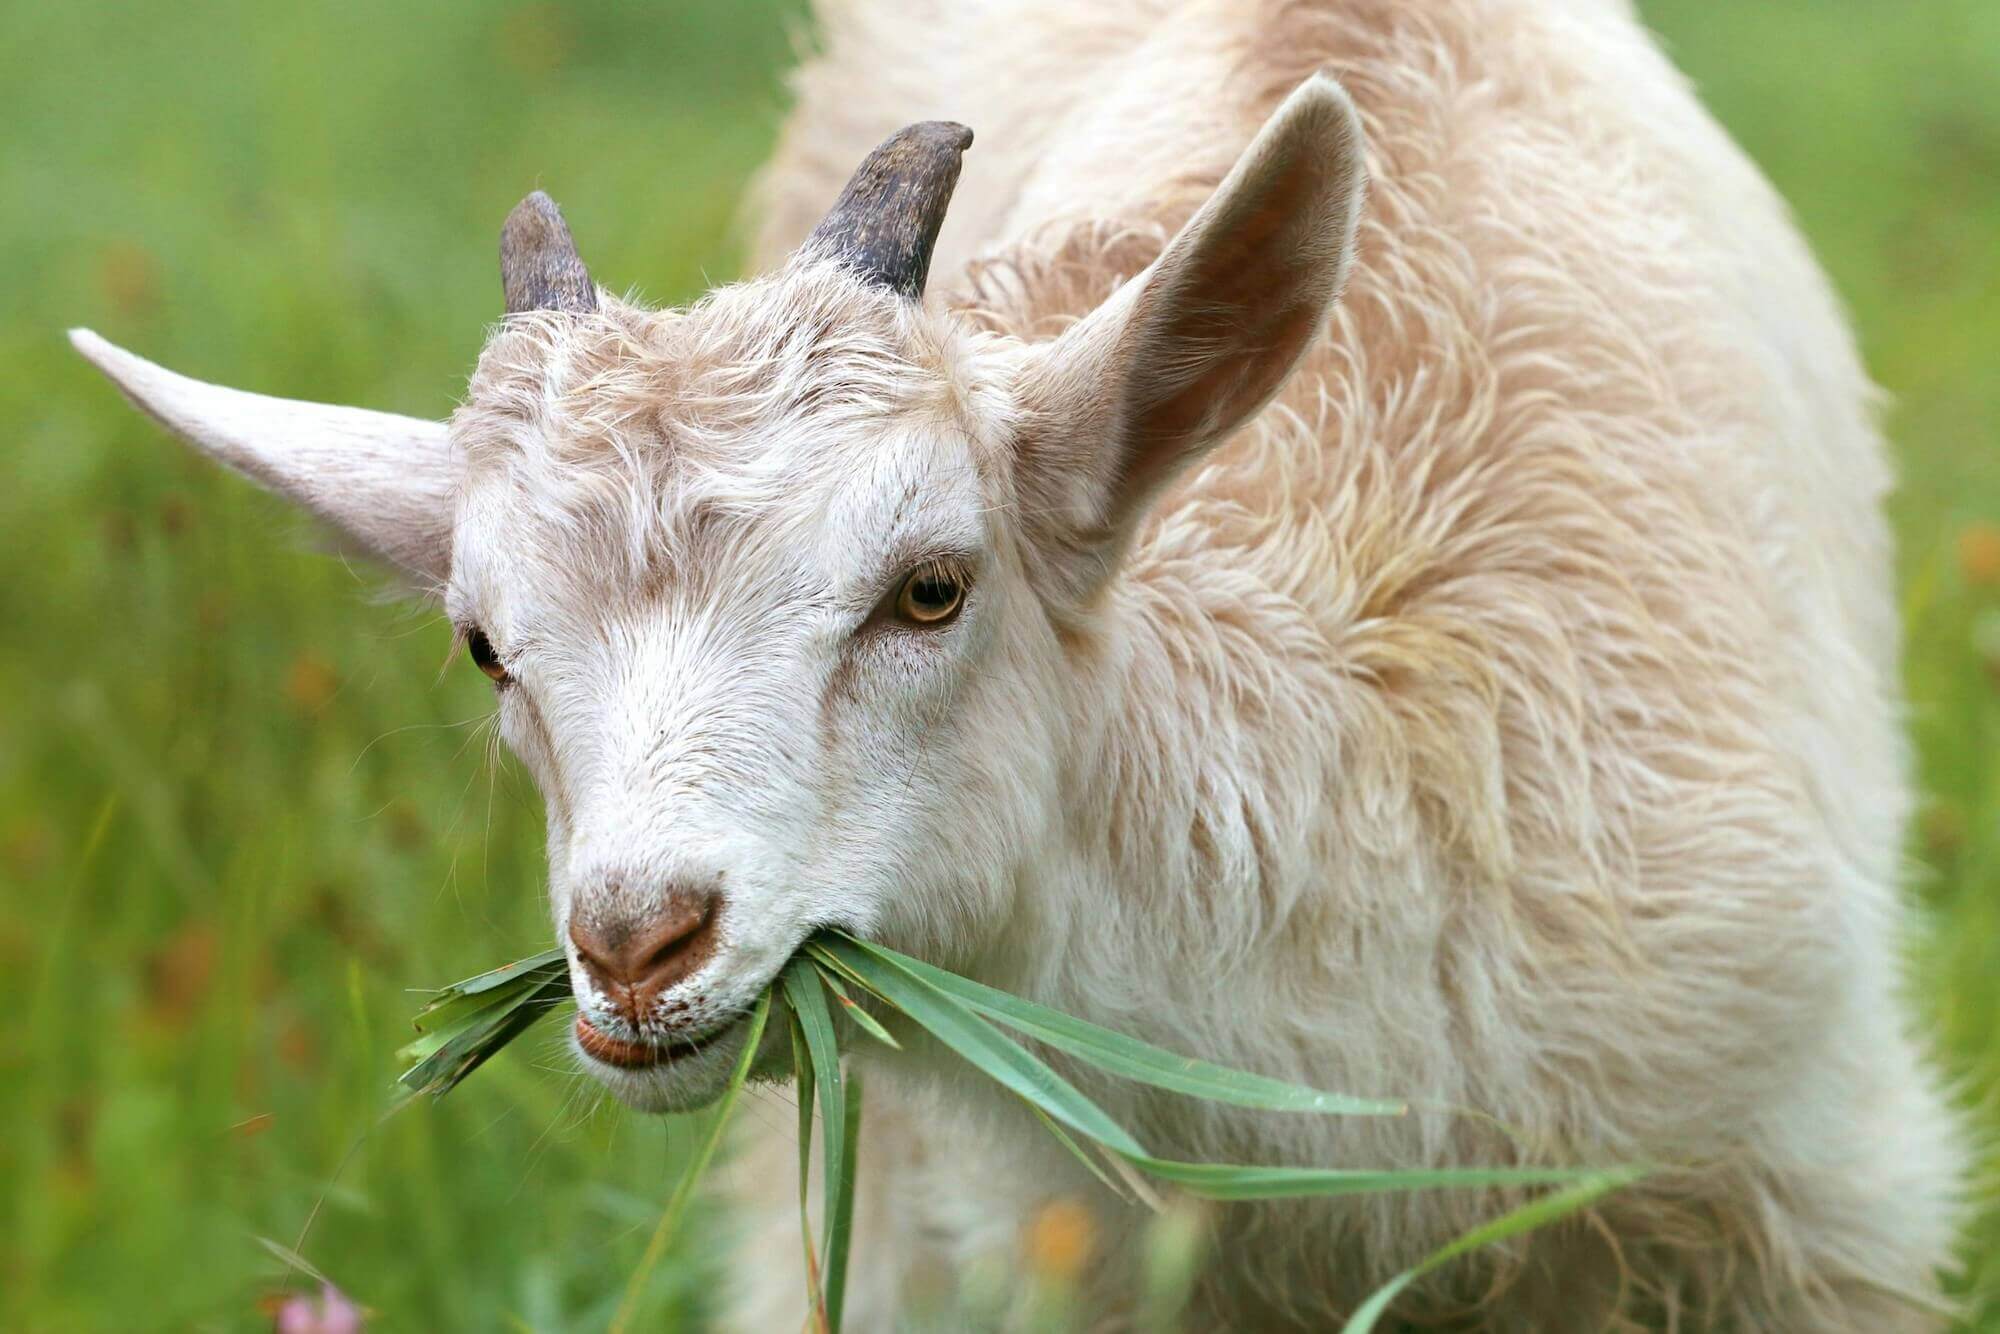 Image of a goat eating grass